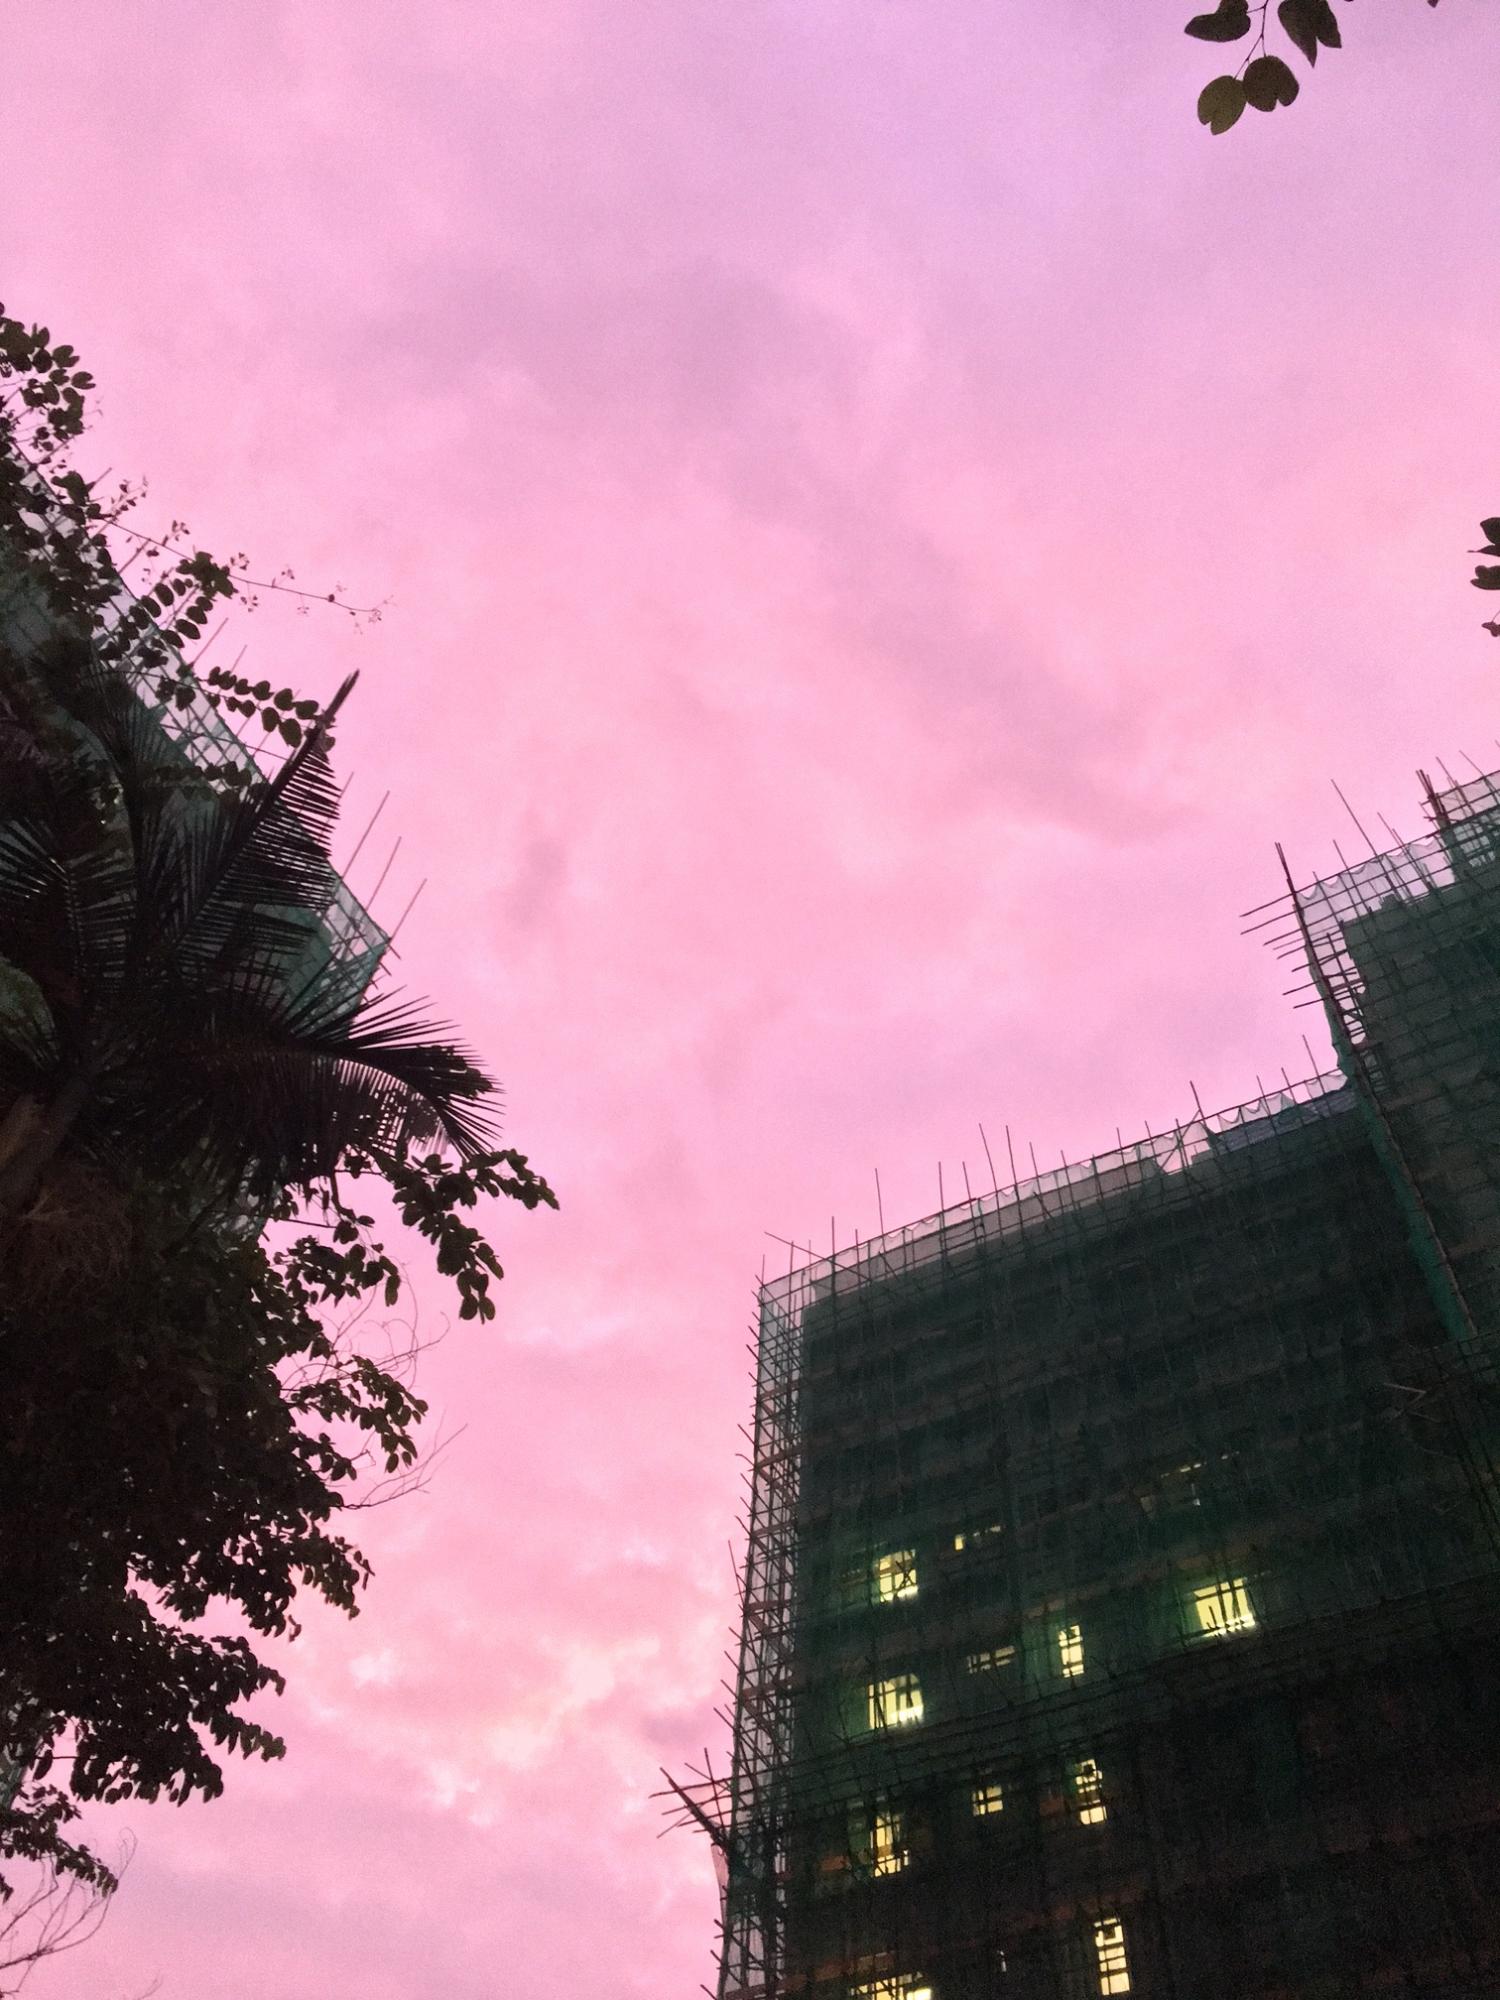 looking up at a building with a pink sky in the background